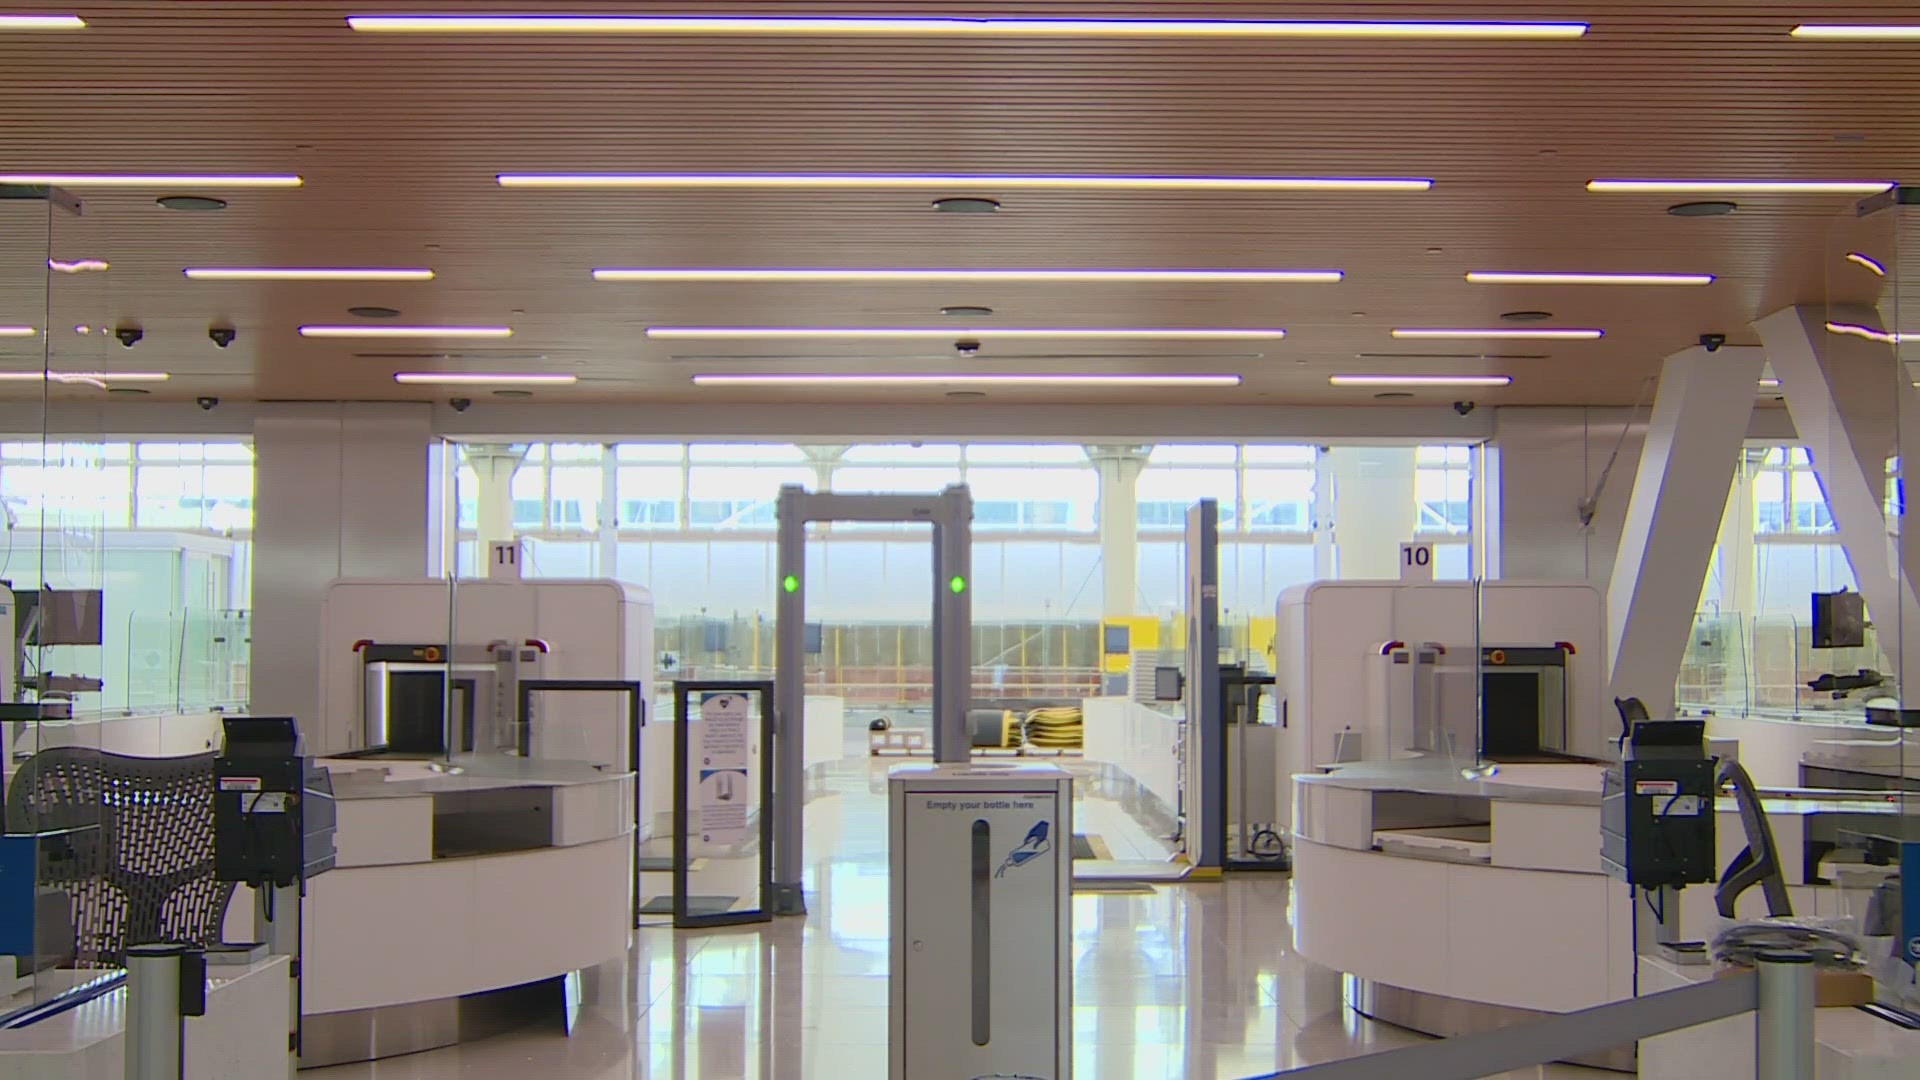 DIA's west security checkpoint will be capable of screening 200 passengers per lane, per hour. The new checkpoint is scheduled to open on Feb. 6.